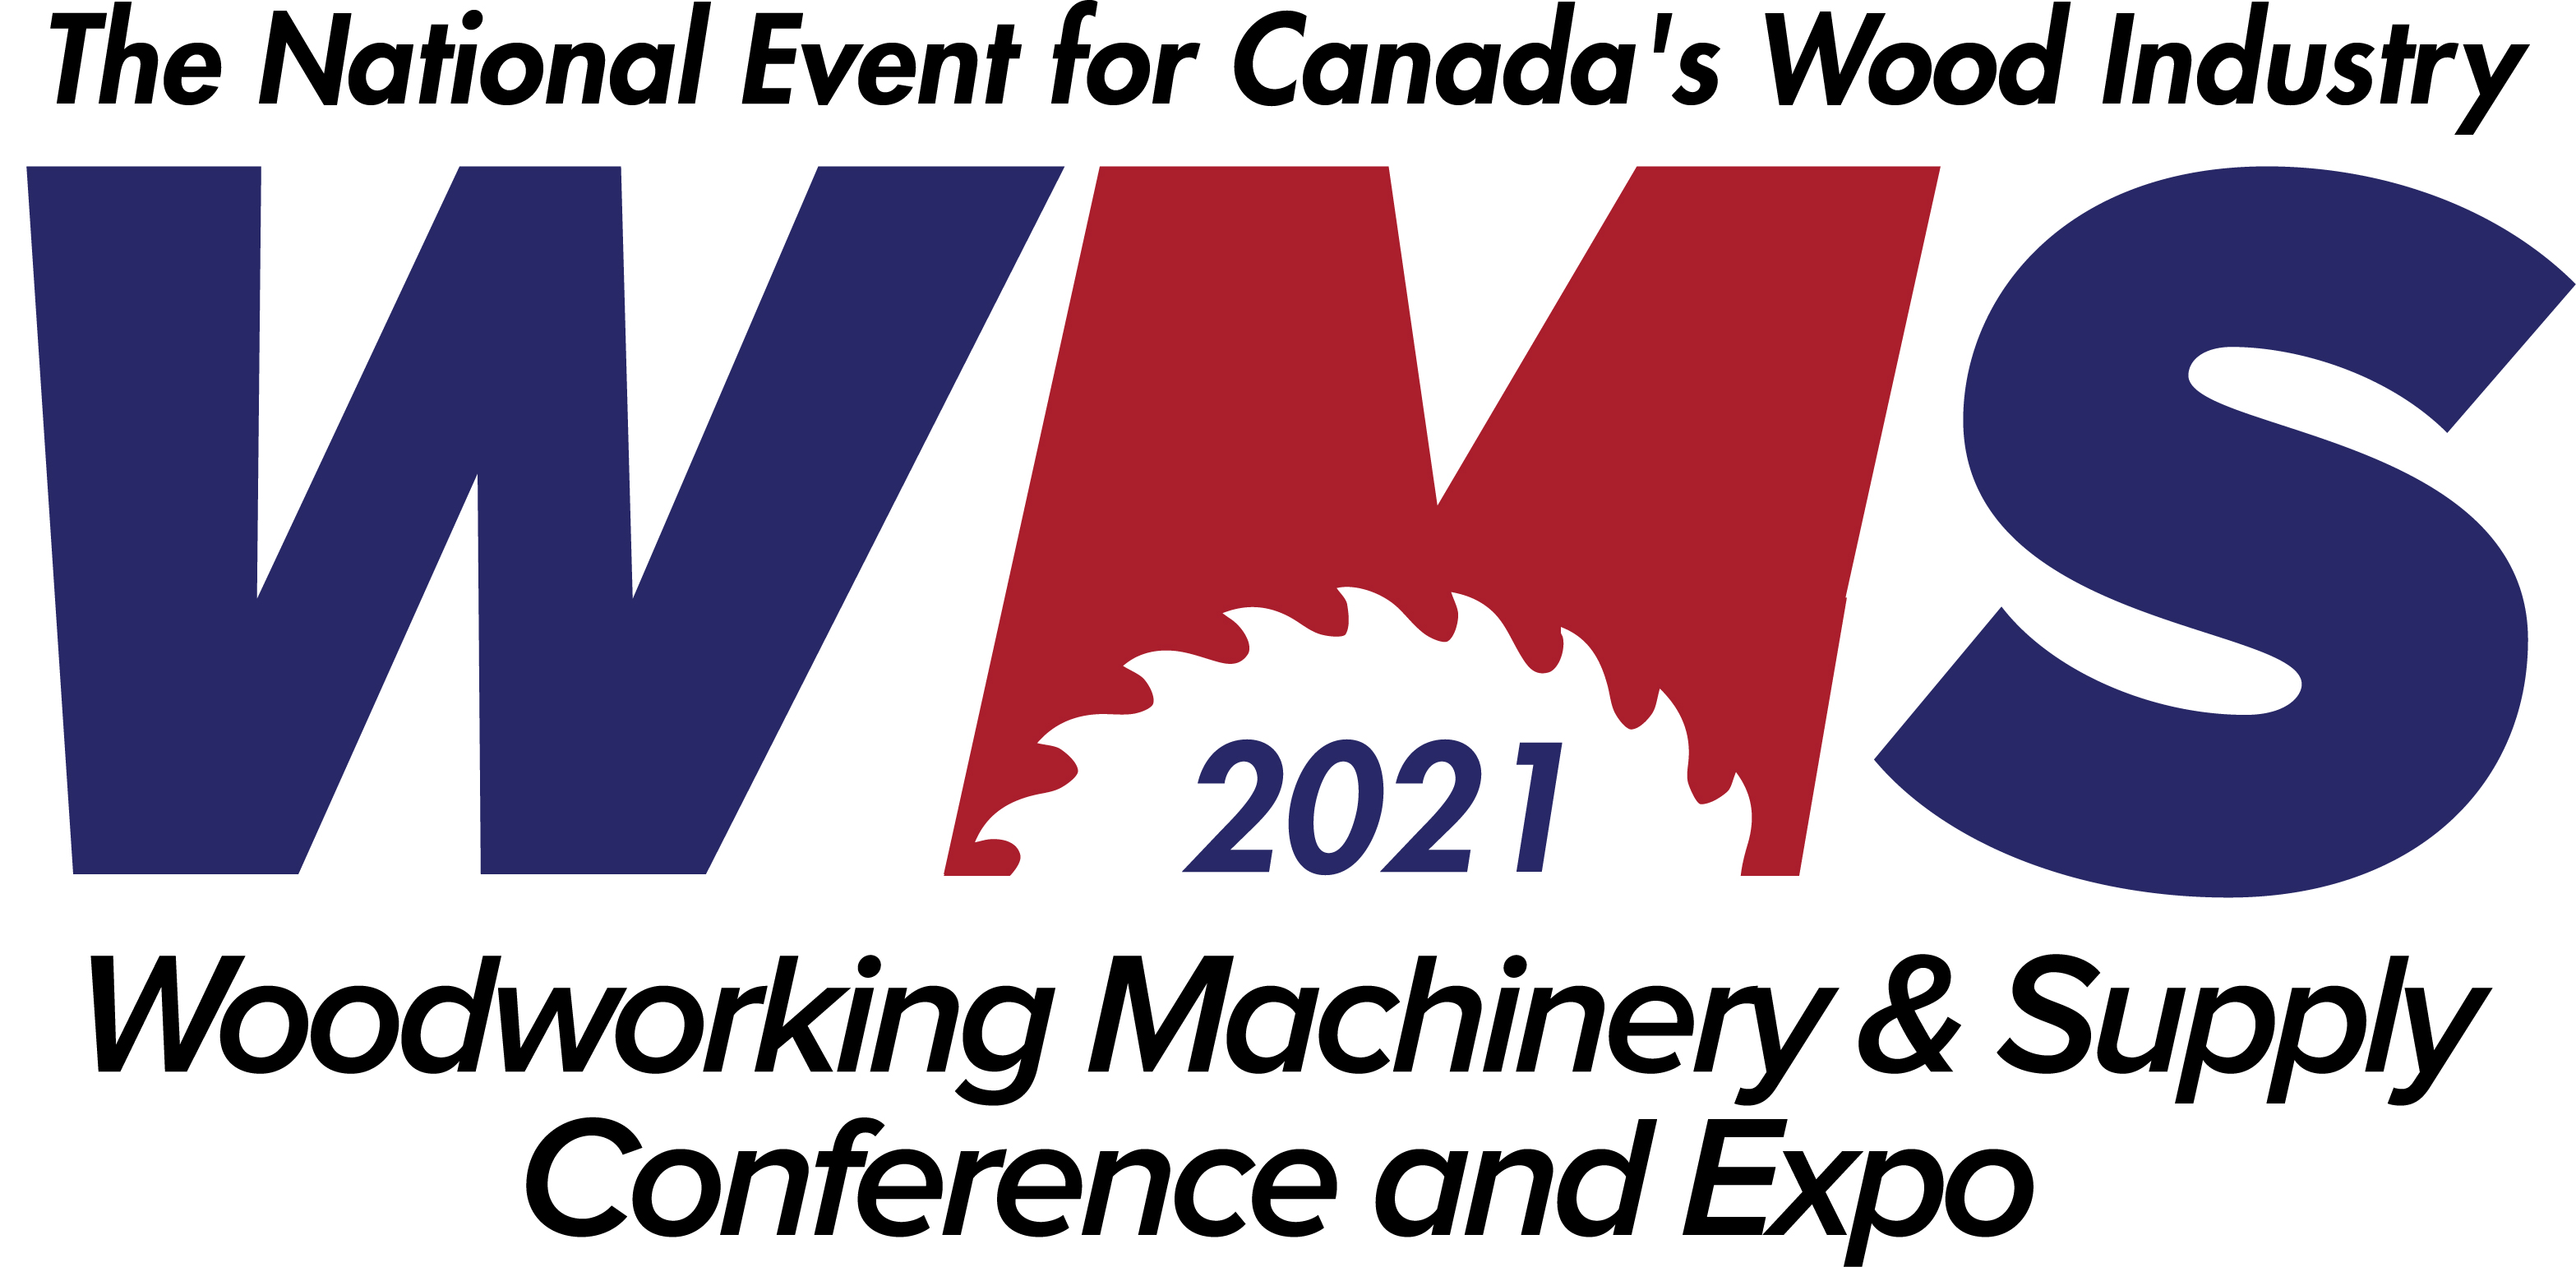 [POSTPONED - NEW DATES TBA] Woodworking Machinery & Supply Conference & Expo